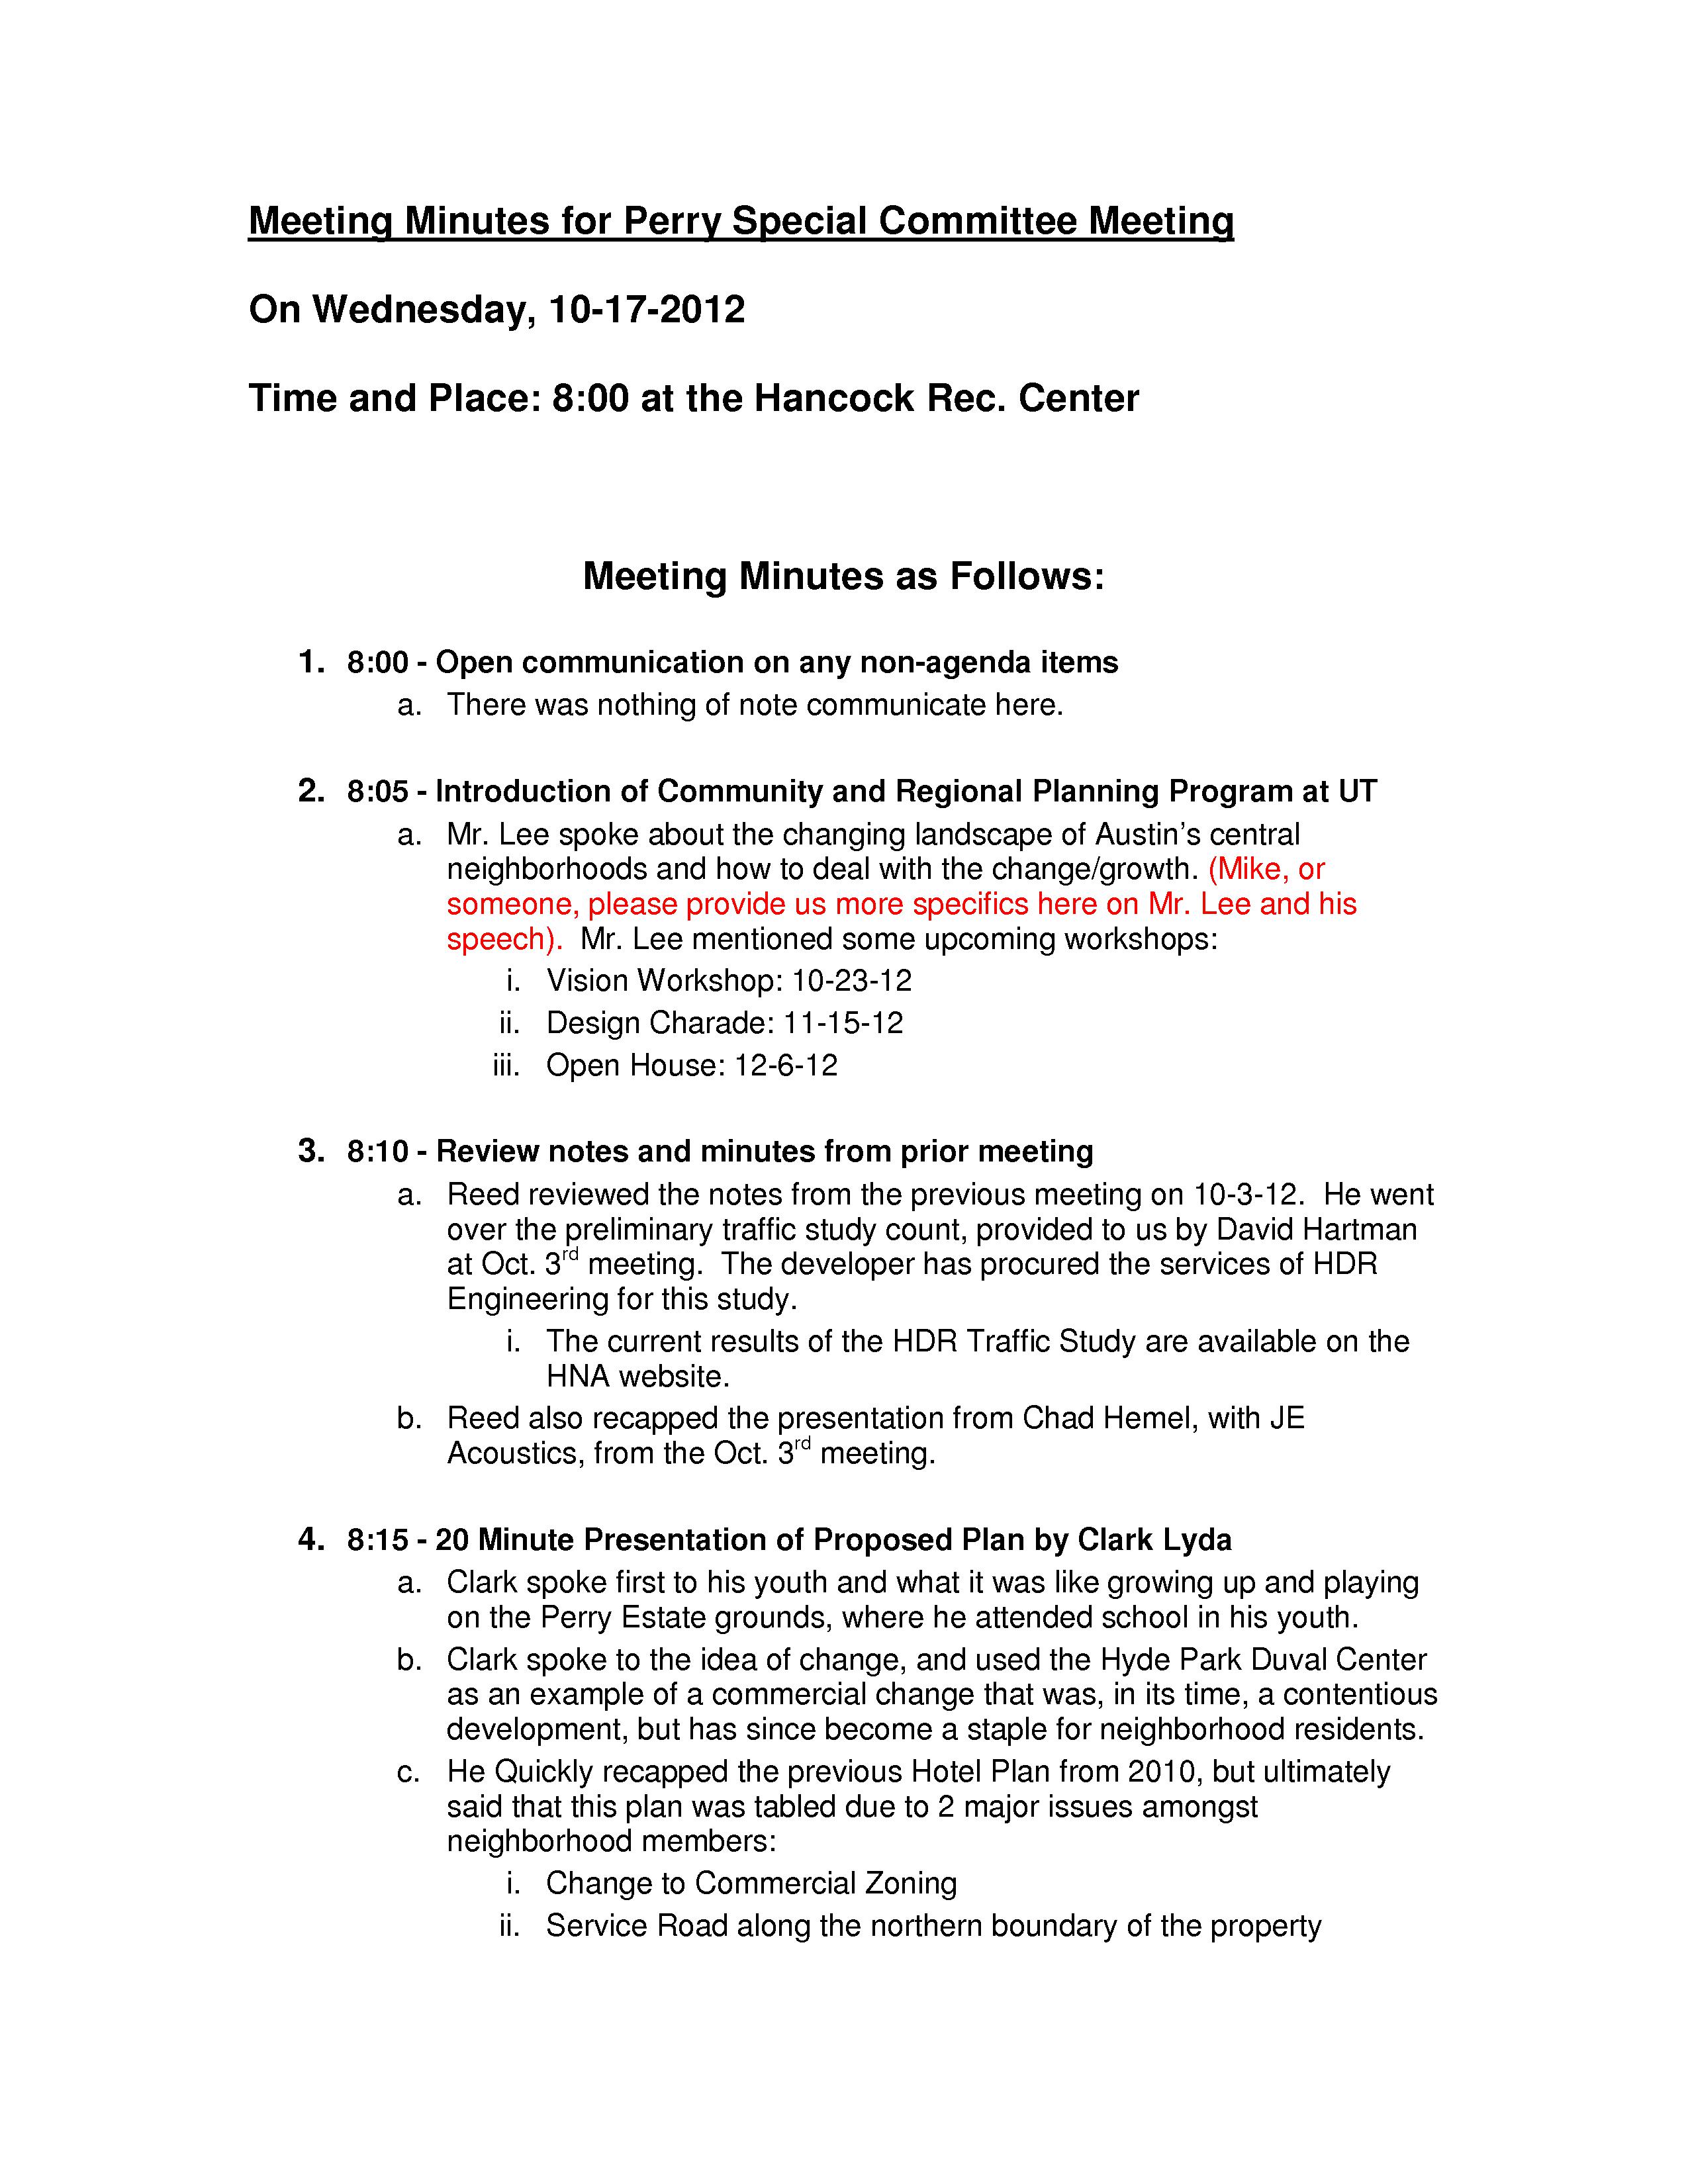 Meeting Minutes for Perry Special Committee Meeting - 10-17-12